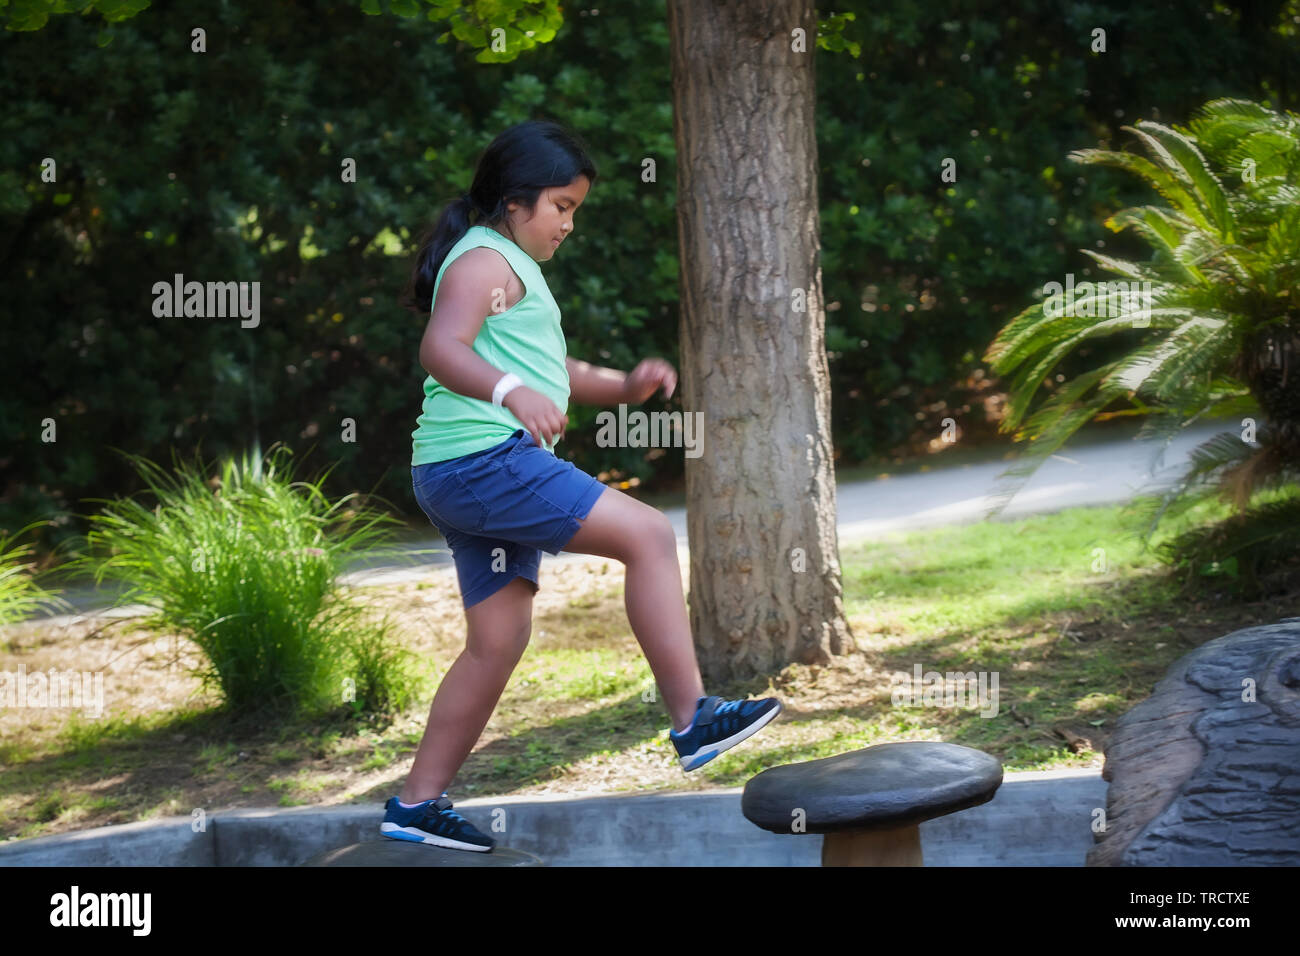 Pre teen girl jumping from one step to another at a kids playground, doing physical activity that develops her sense of balance. Stock Photo